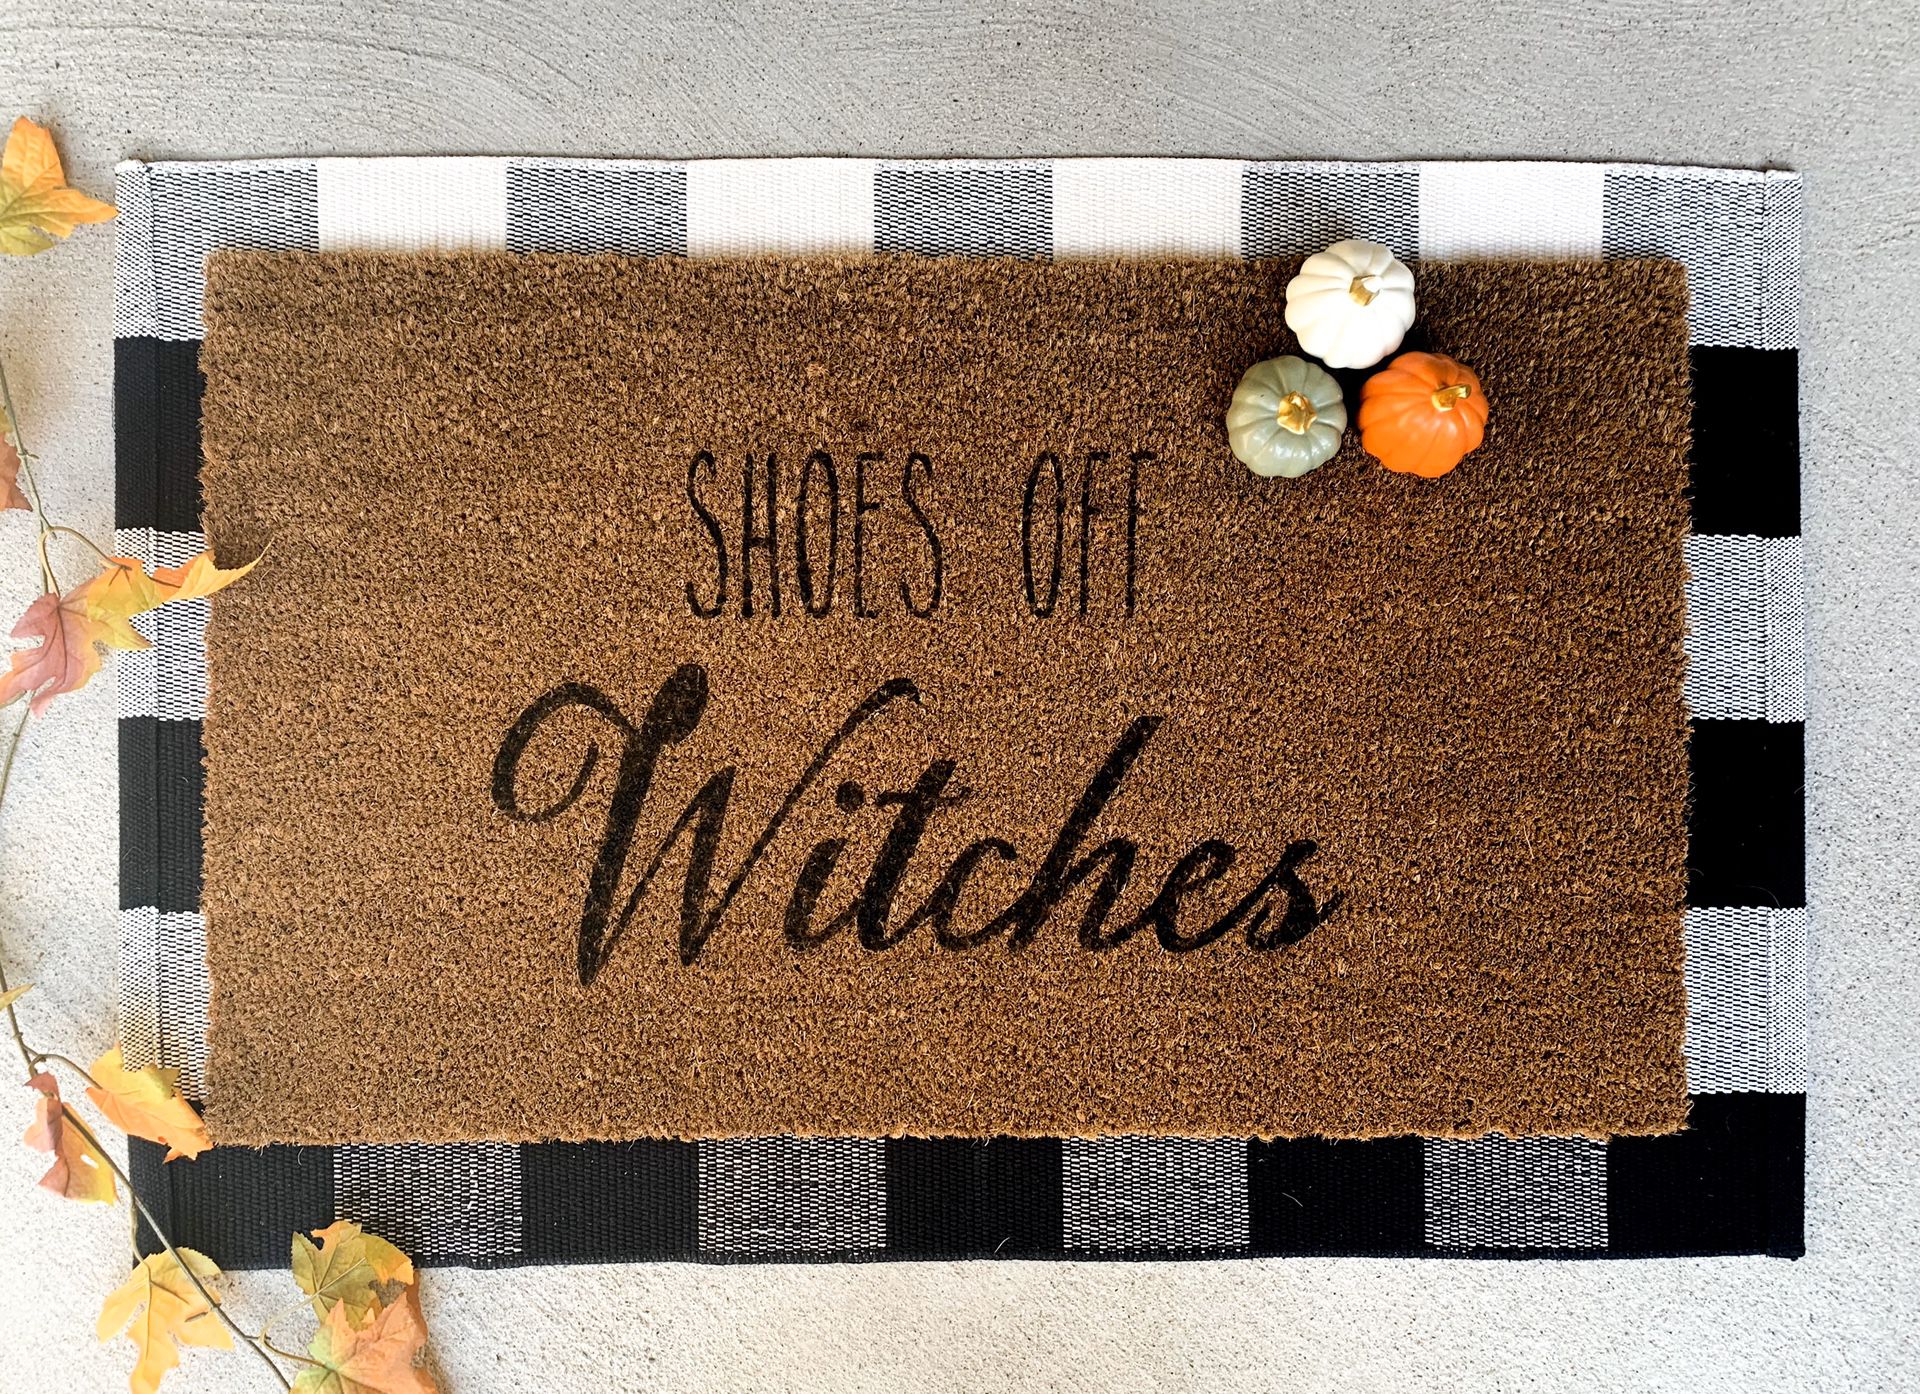 “Shoes off witches” door mat